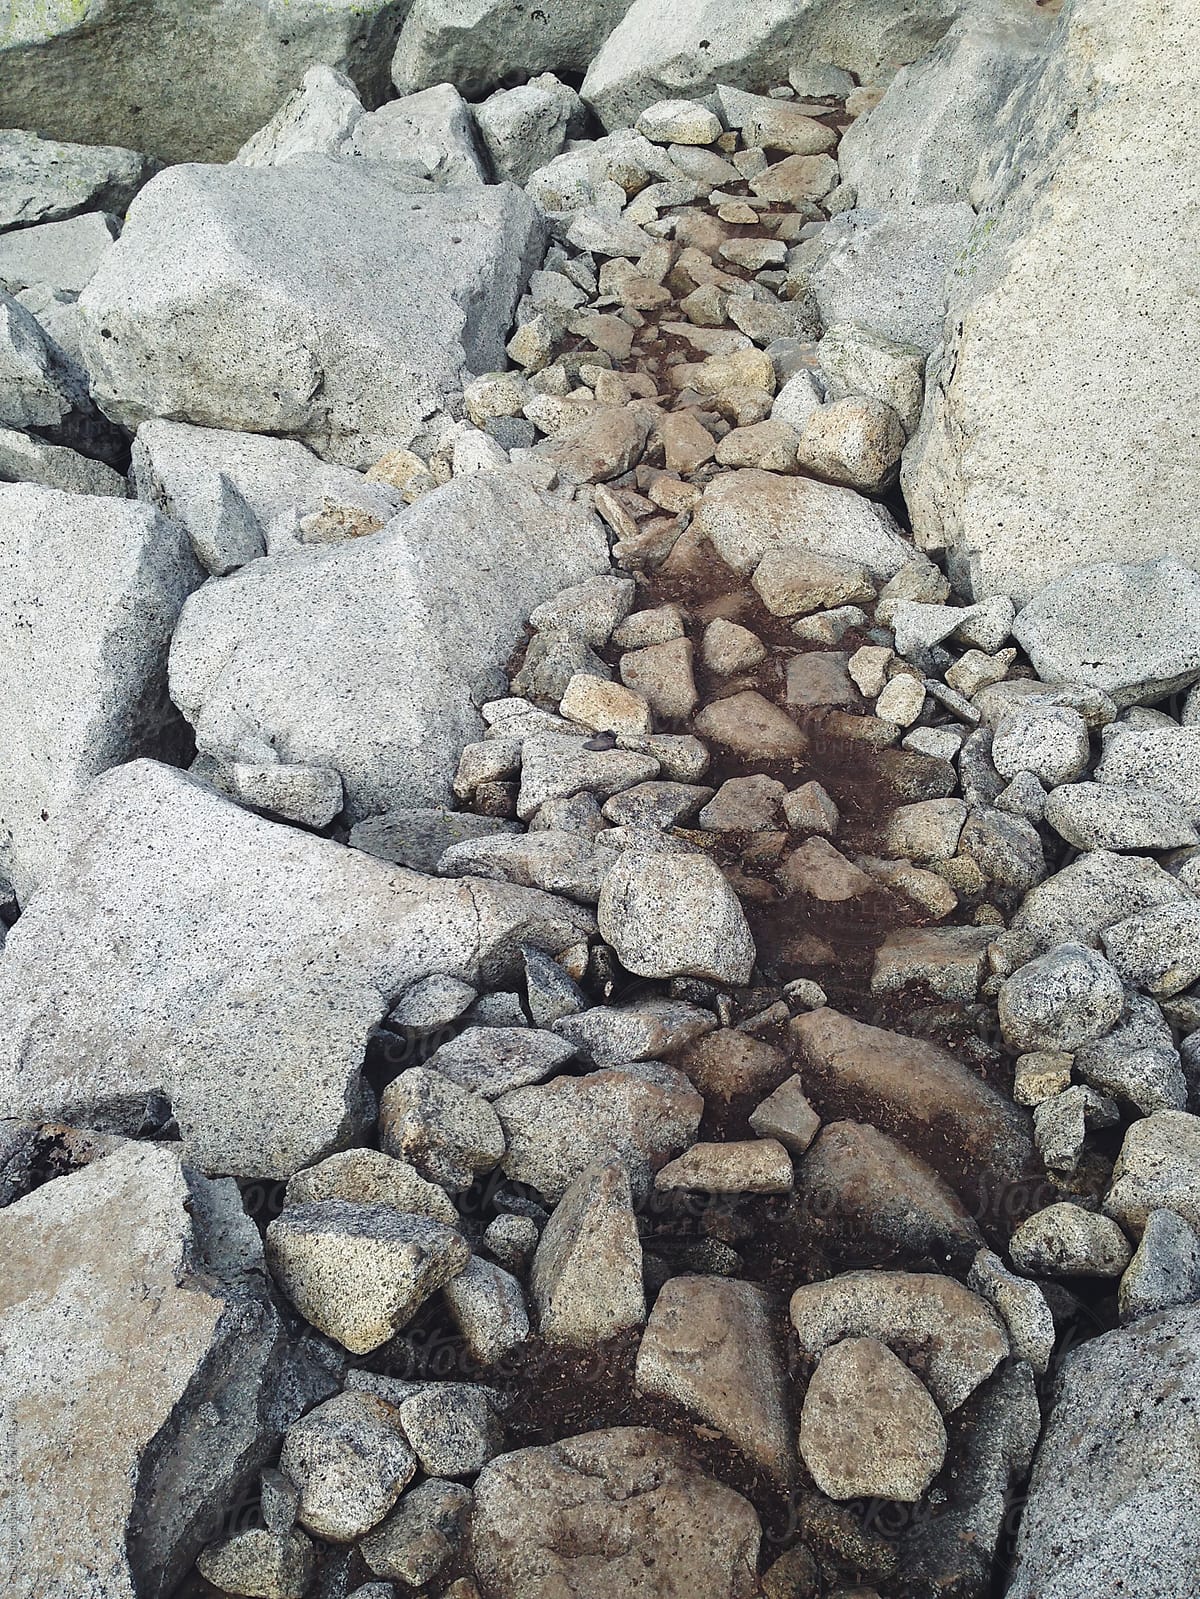 Hiking trail through boulders and stones